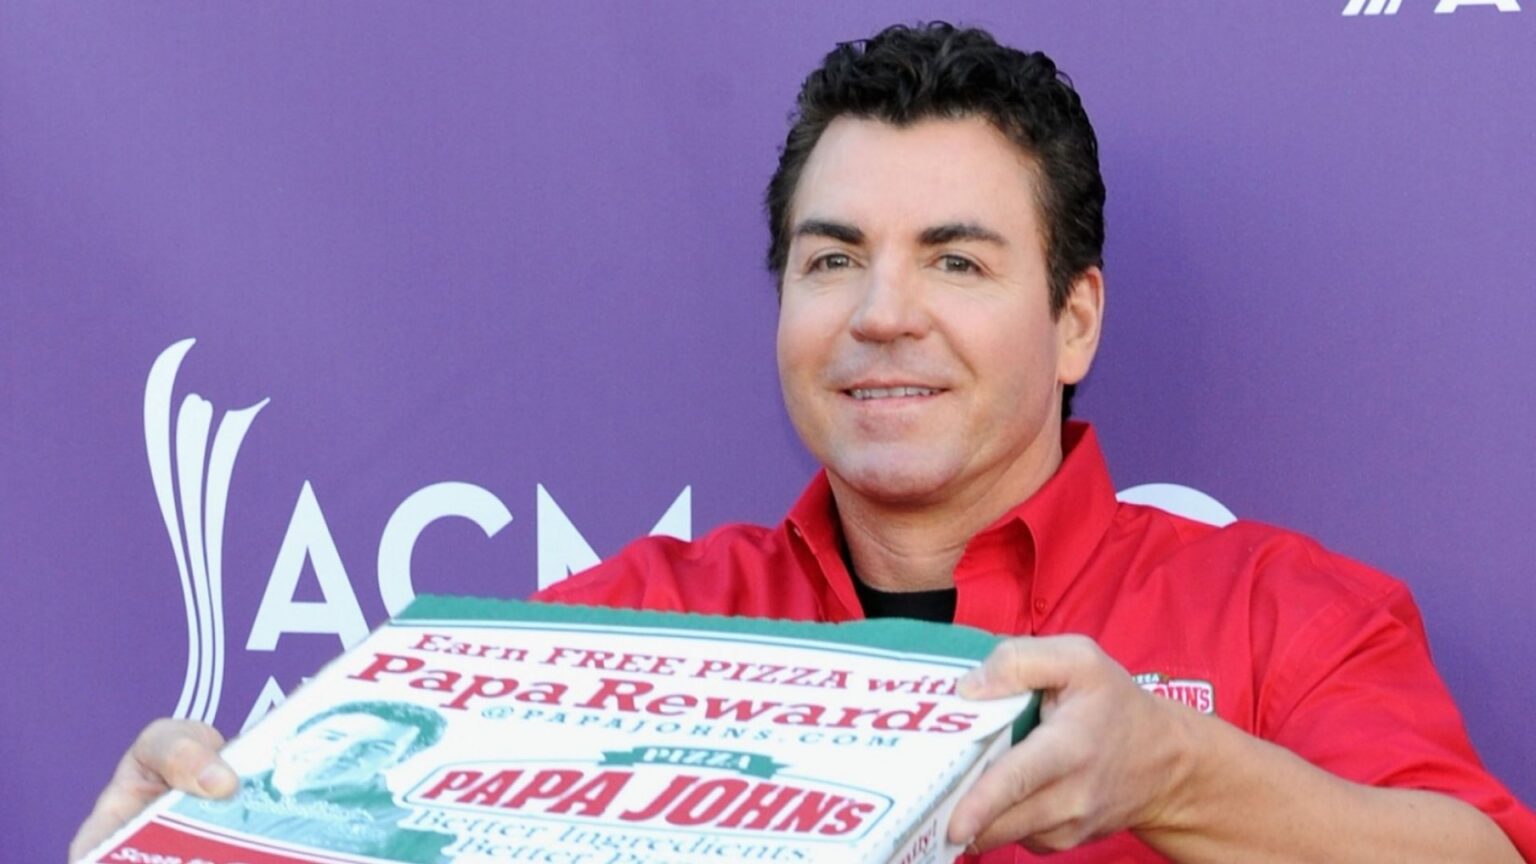 Former Papa John's CEO John Schnatter is making headlines once more. Better ingredients? How about a better attitude! We're here to deliver the full story.